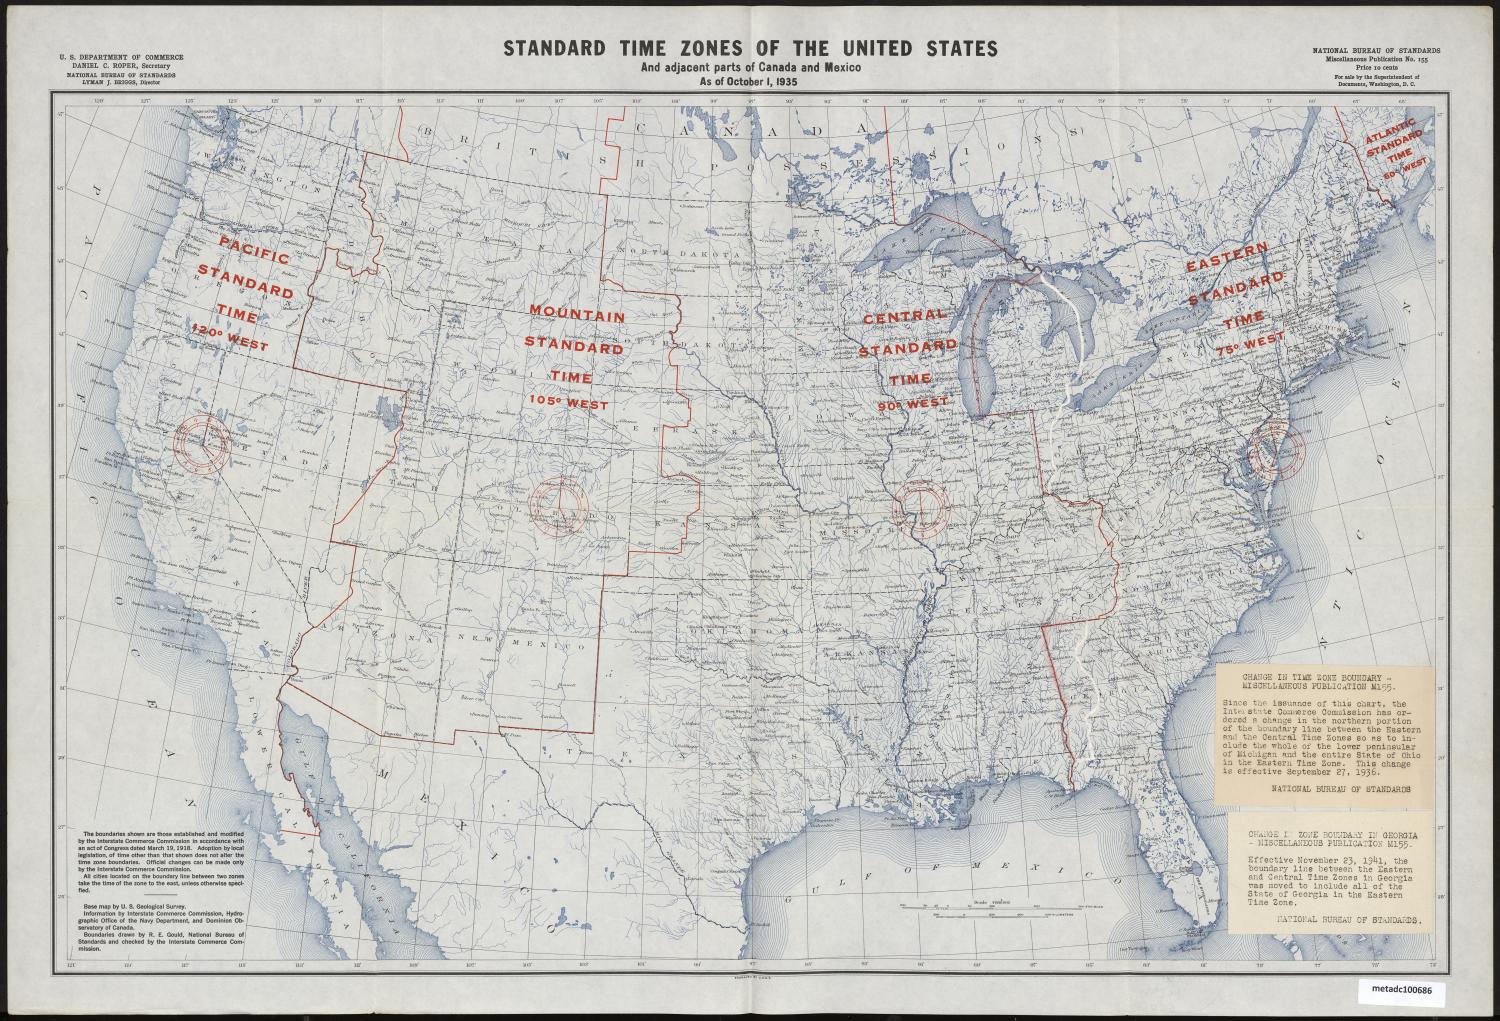 Standard Zones of the United States and adjacent Parts of Canada Mexico as October 1, 1935 - UNT Digital Library